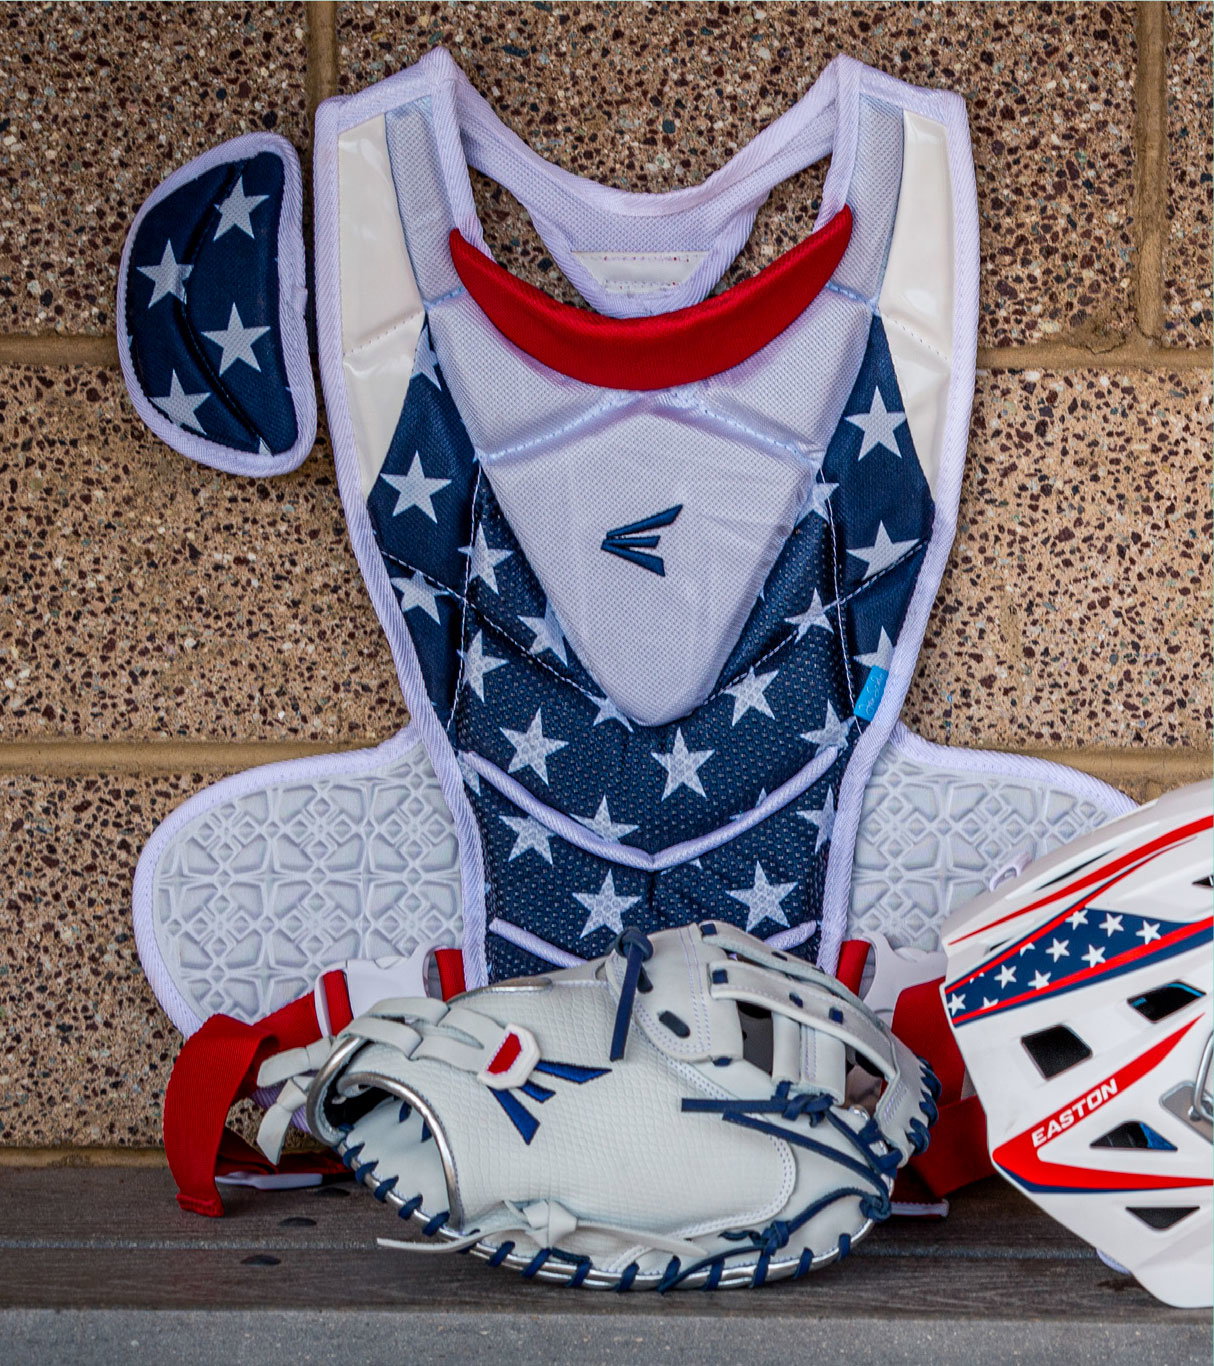 This Just In! Easton's Limited Edition Stars and Stripes